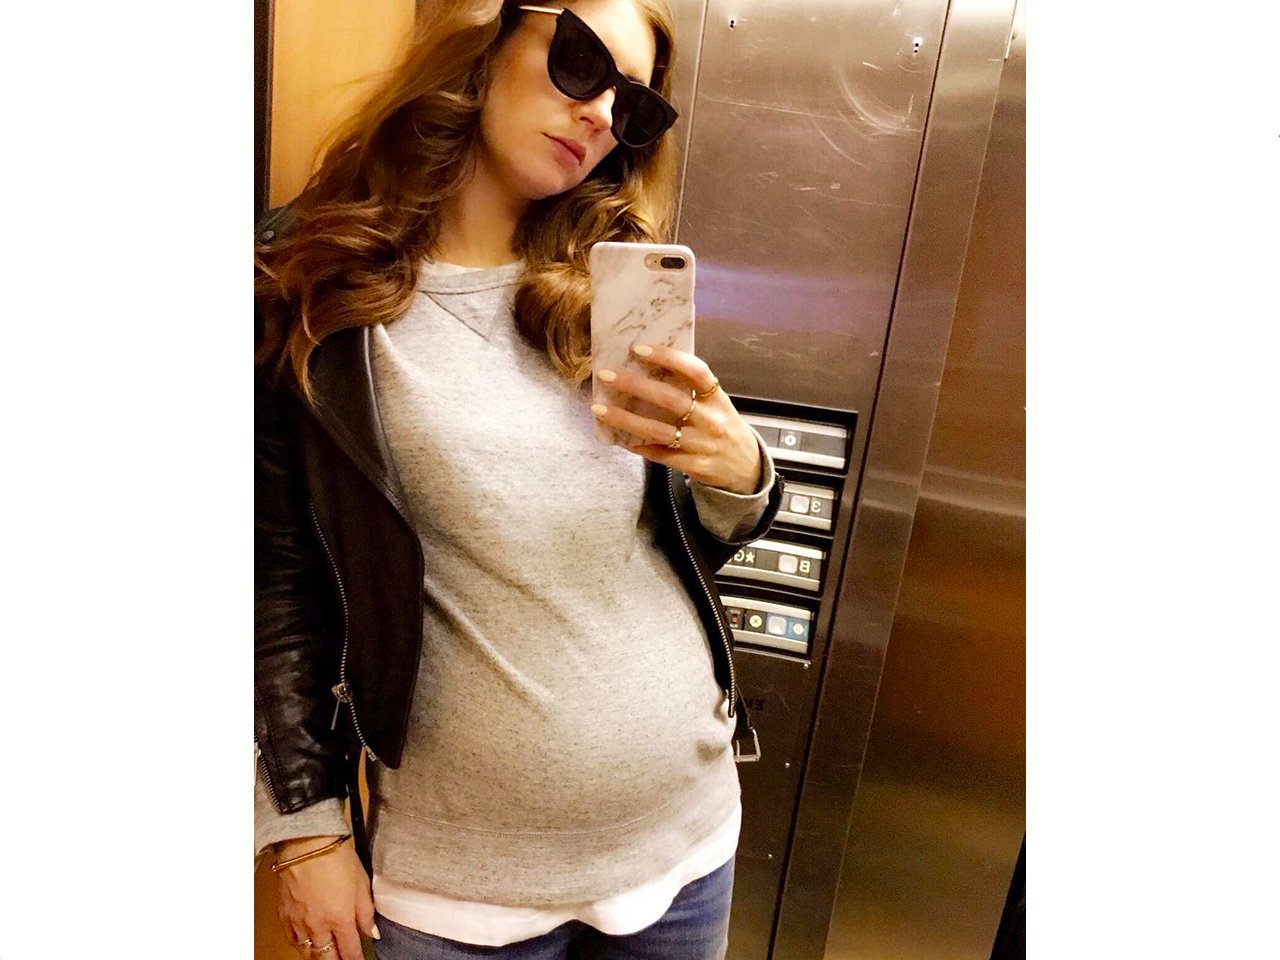 Pregnant woman takes a mirror selfie in an elevator